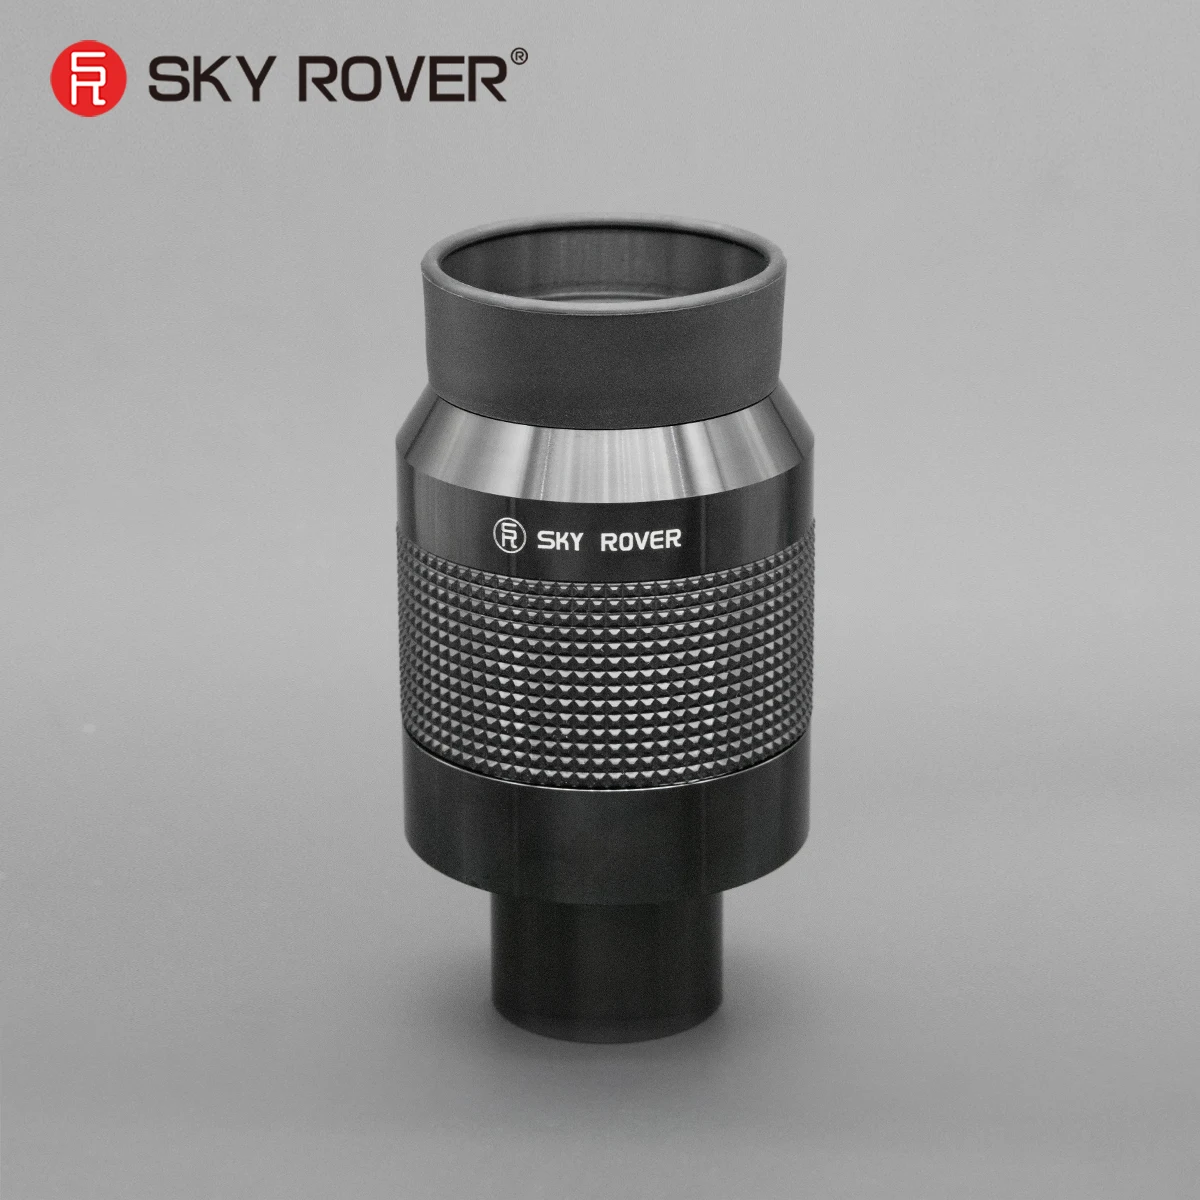 

SKY ROVER UF 24mm Ultra Flat Field Telescope Eyepiece 1.25 Inches FMC Astronomy Accessory